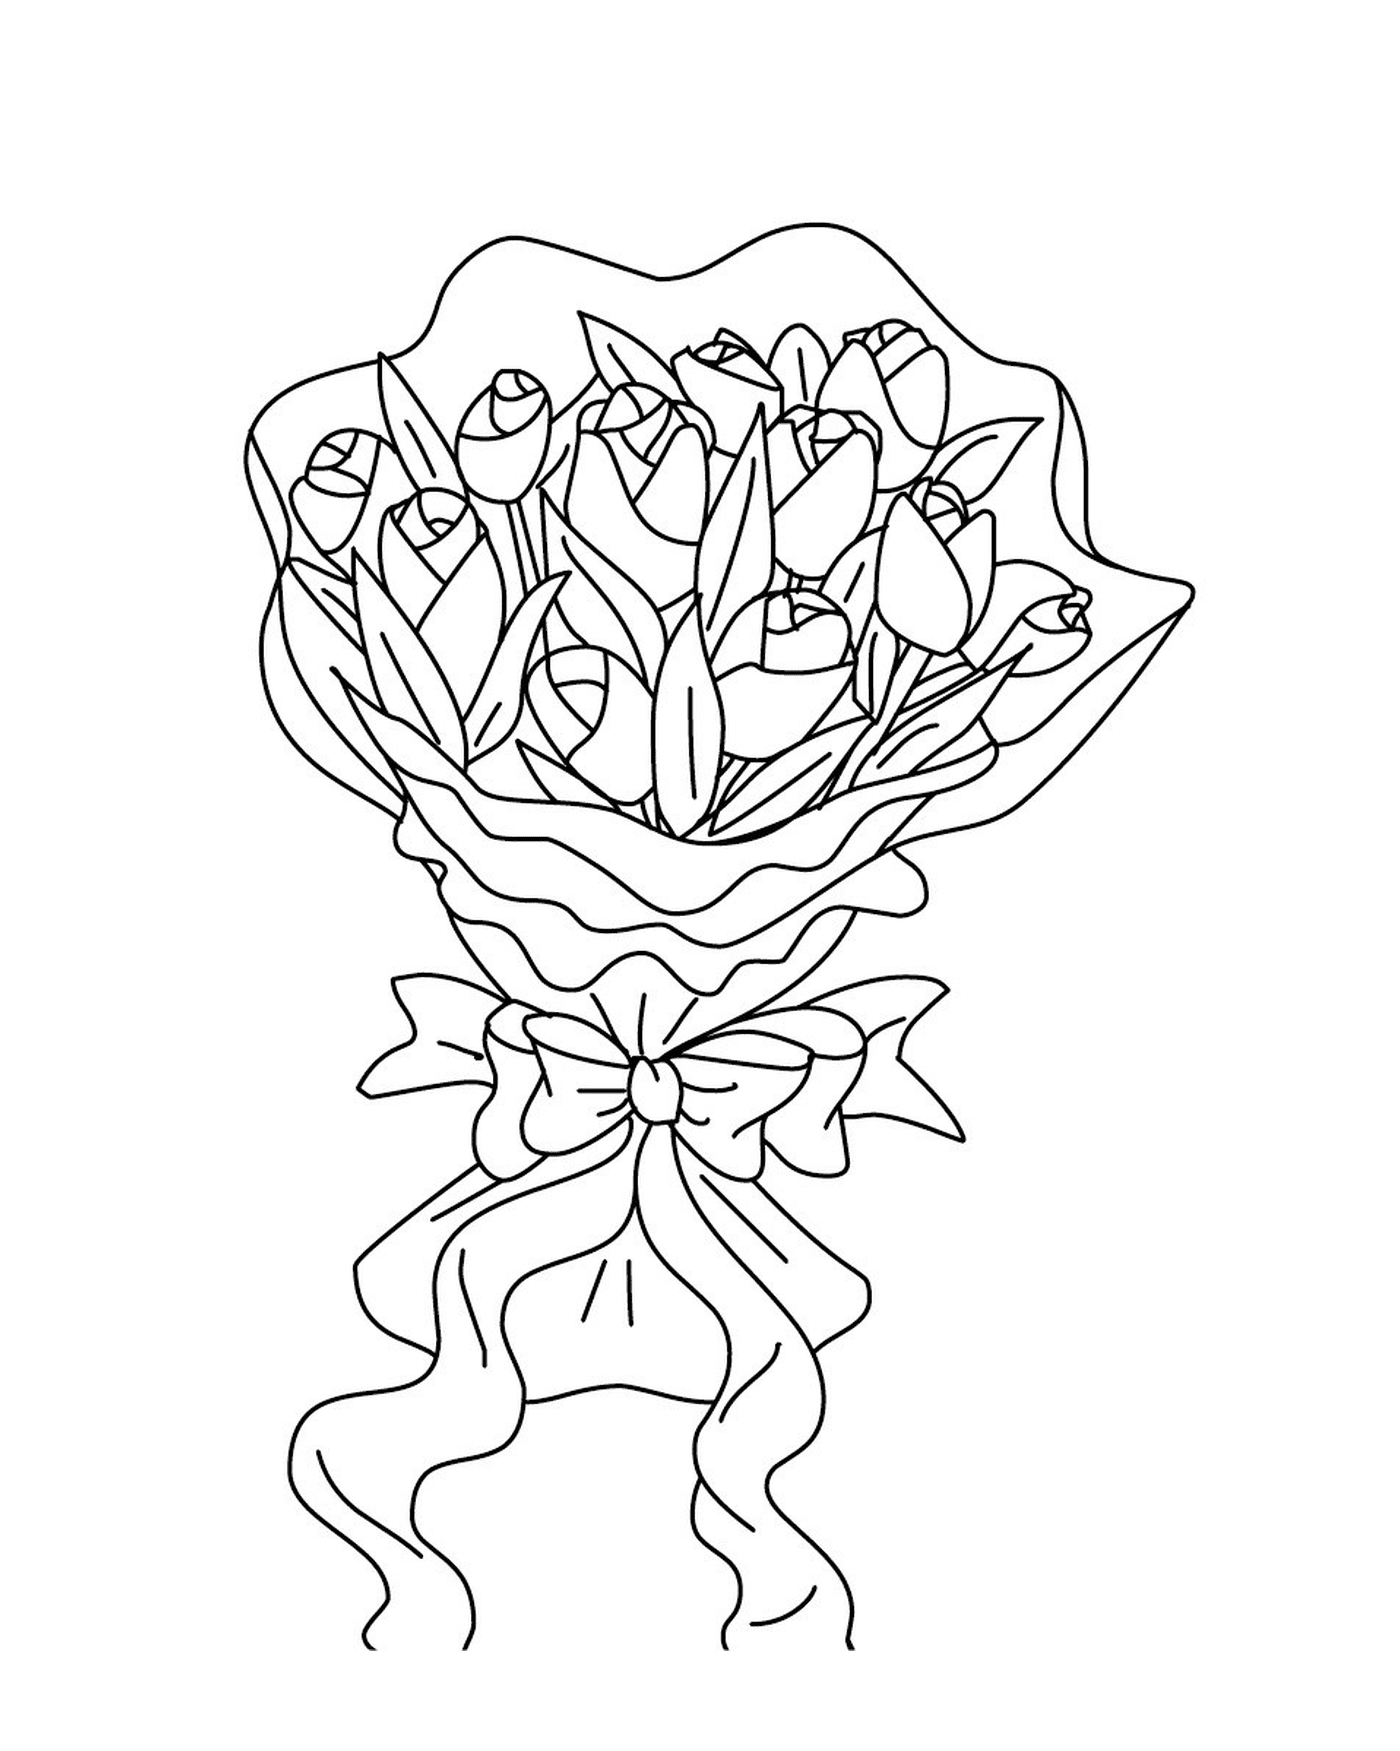  A bouquet of roses with a knot 